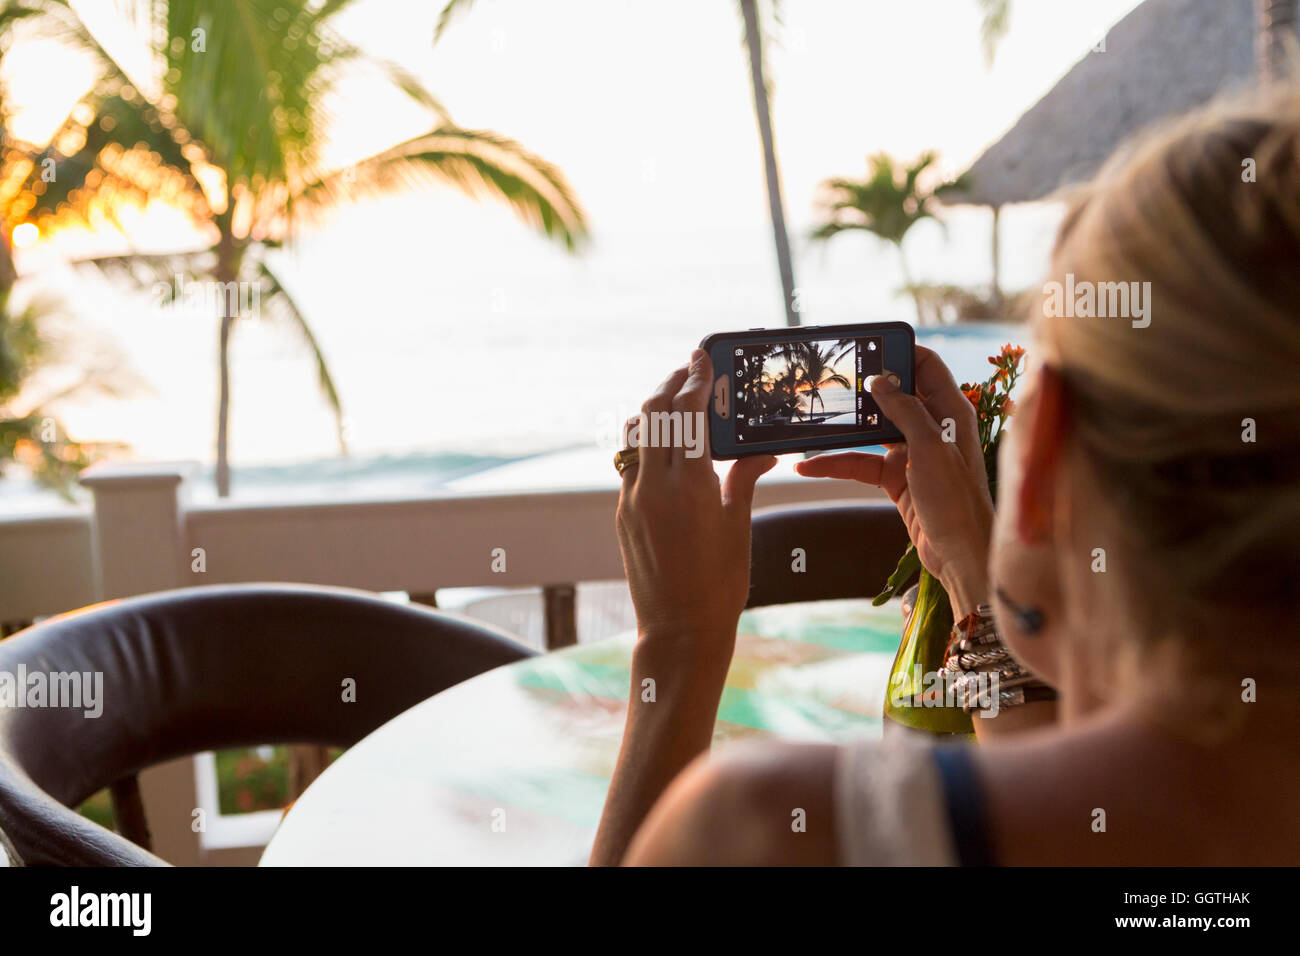 Caucasian woman photographing sunset at beach Banque D'Images